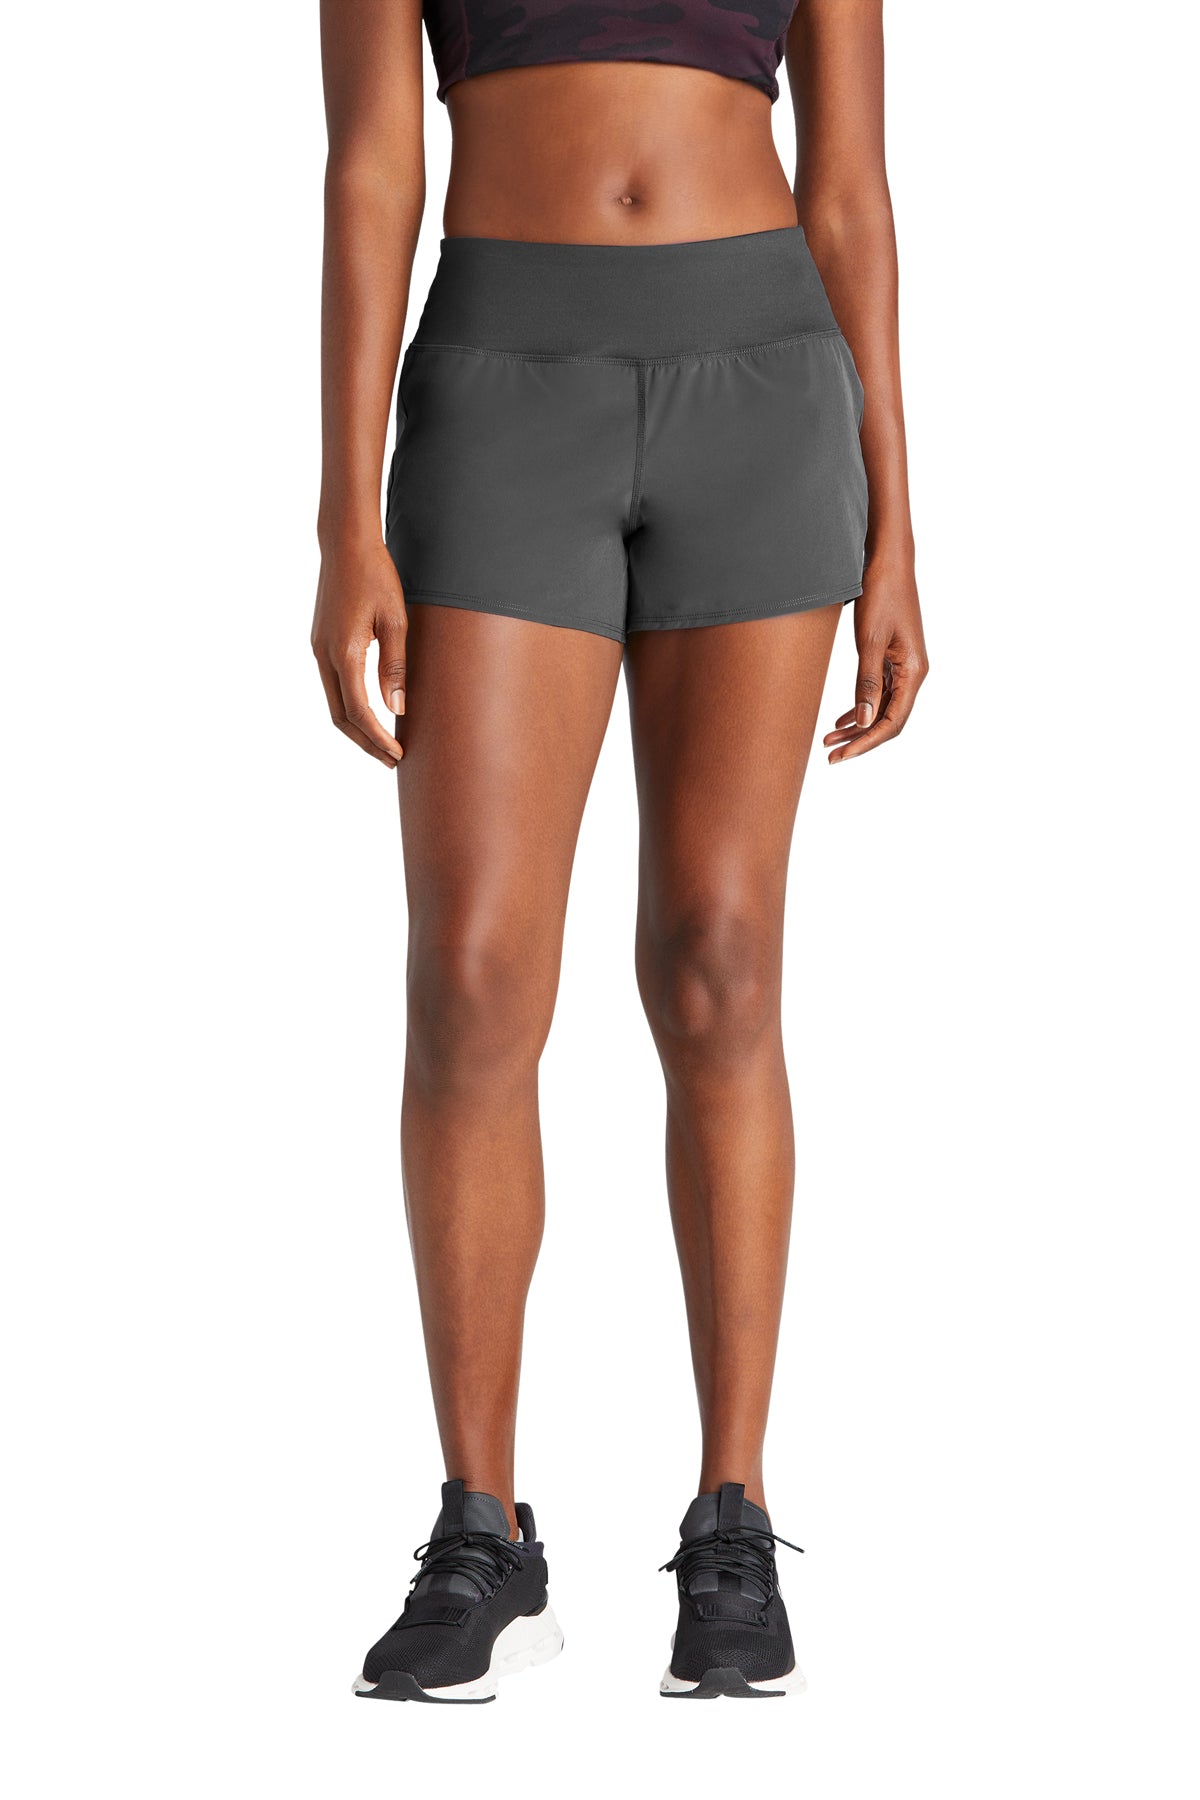 Windsor - Ladies Repeat Short with W - Graphite (LST485) - Southern Grace Creations